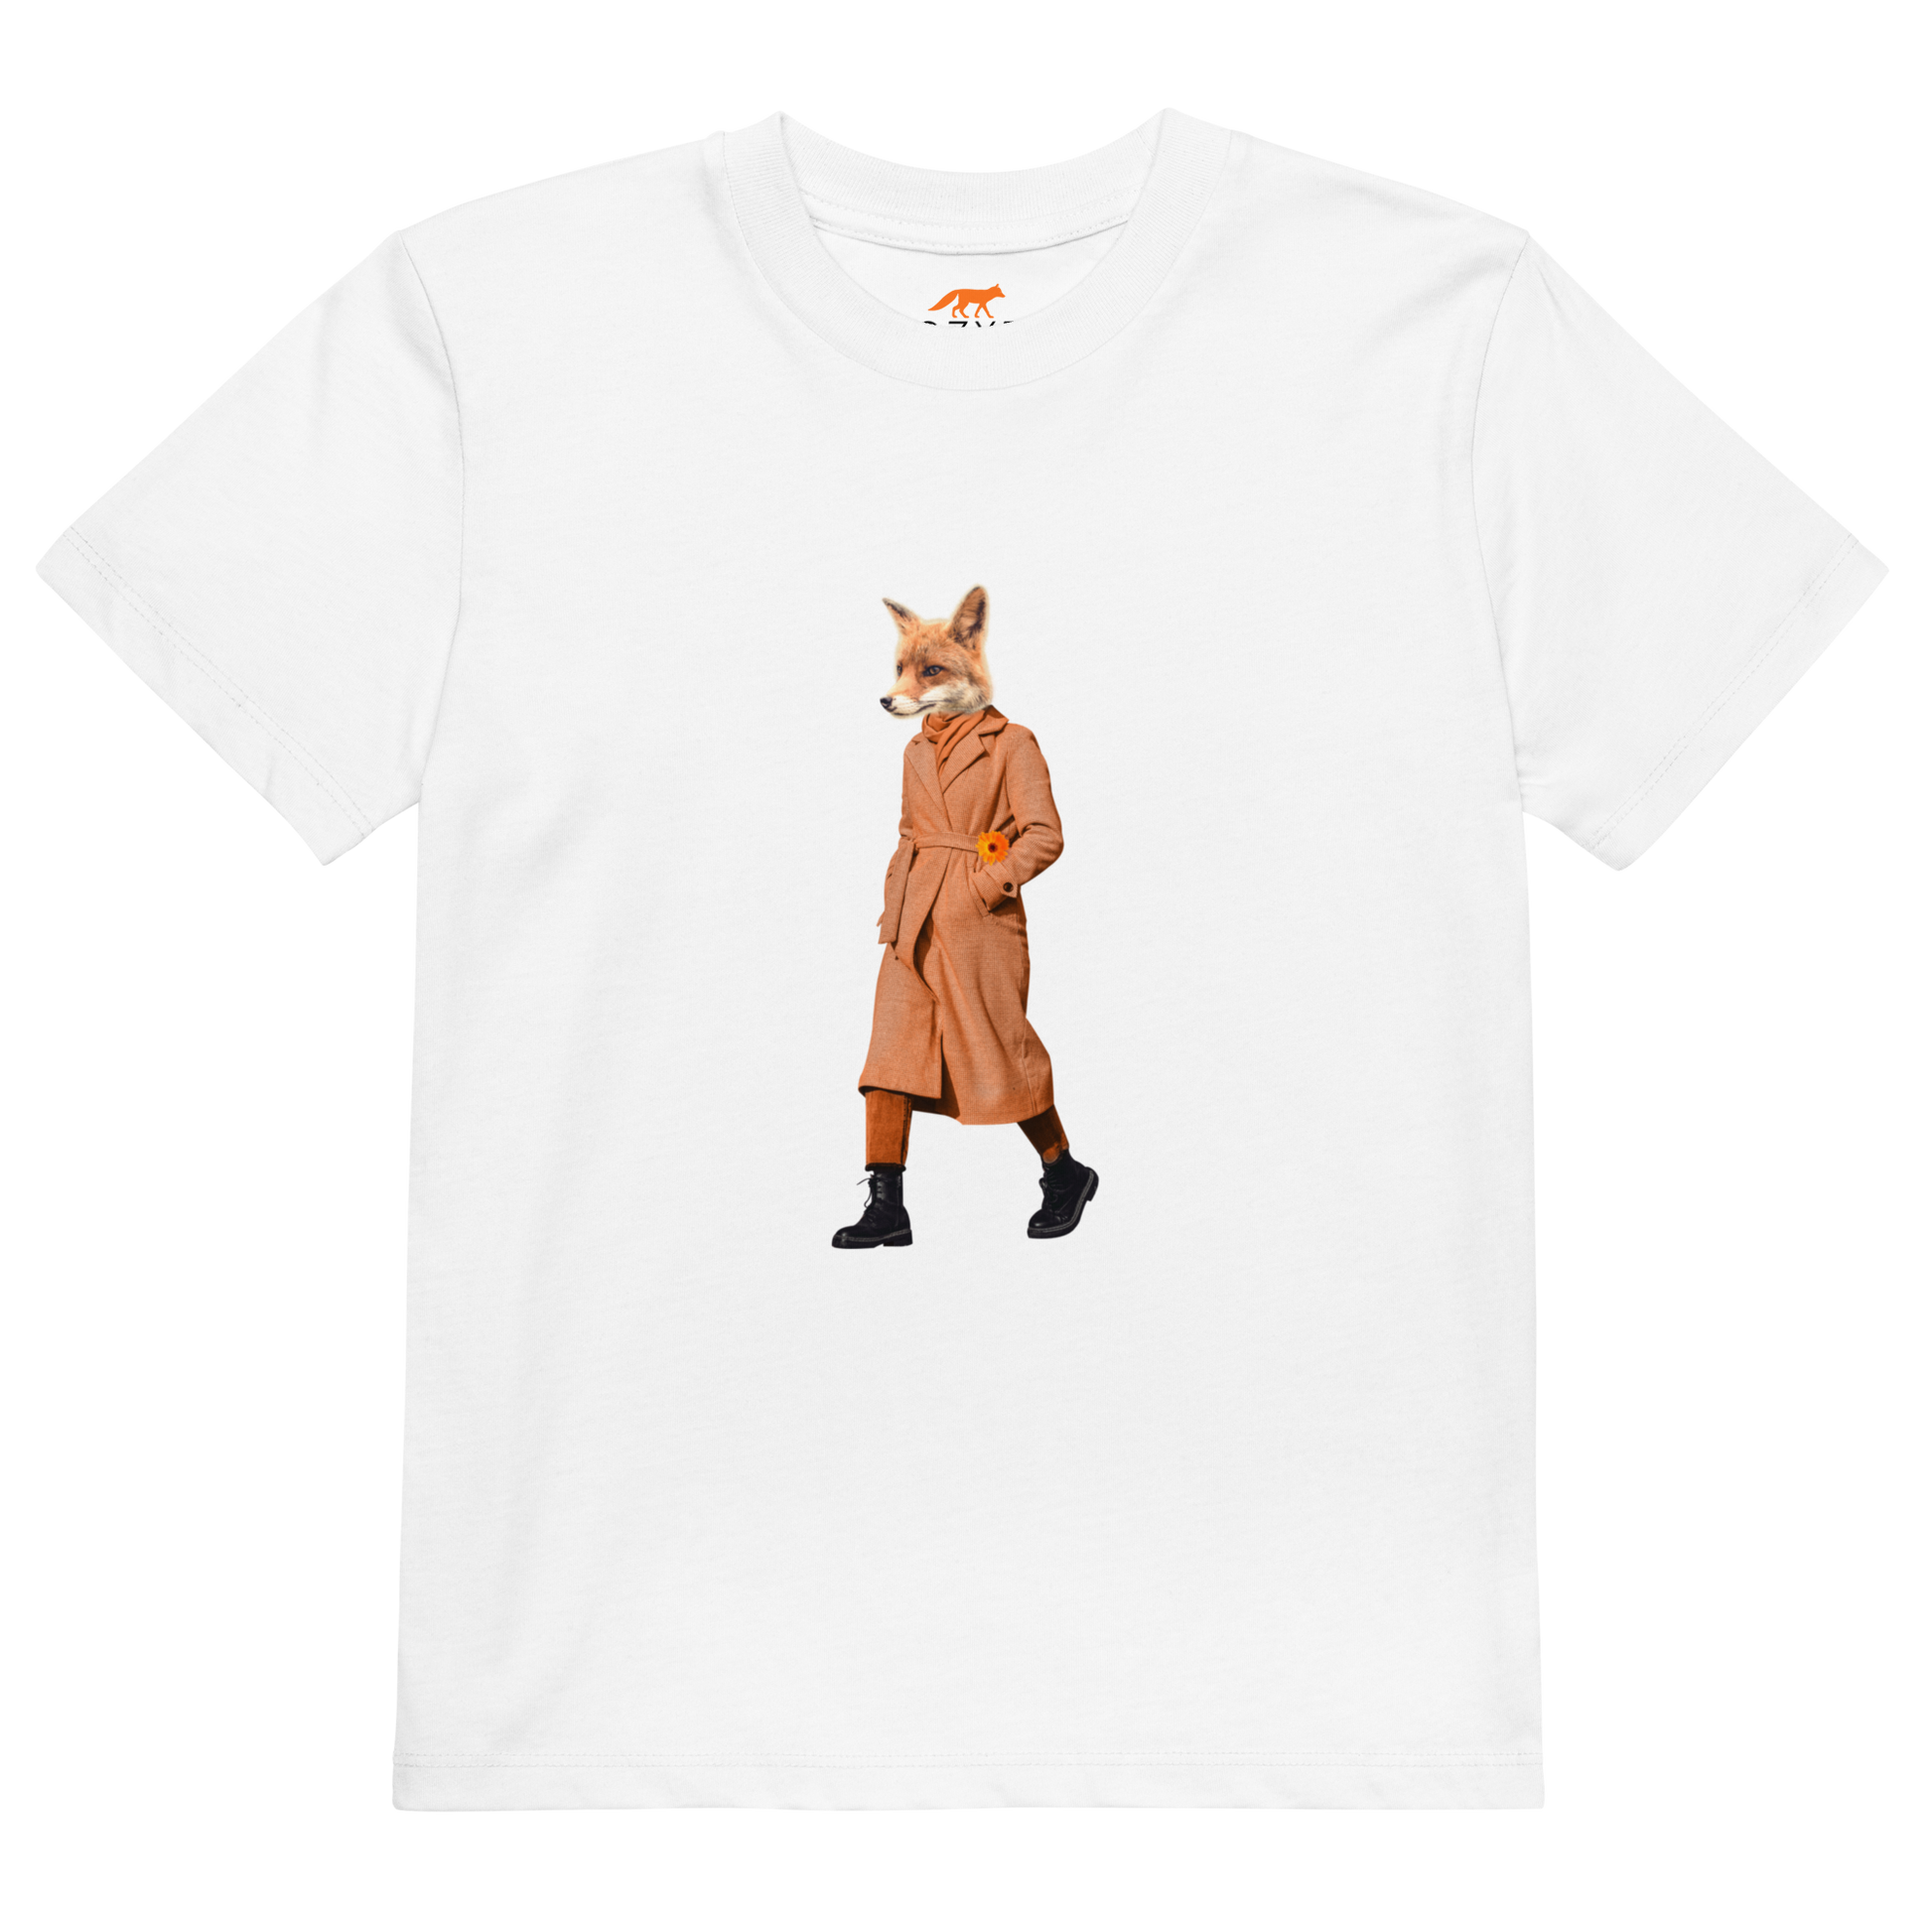 White Anthropomorphic Fox Organic Cotton Kids T-Shirt featuring an Anthropomorphic Fox In a Trench Coat graphic on the chest - Kids' Graphic Tees - Funny Animal T-Shirts - Boozy Fox